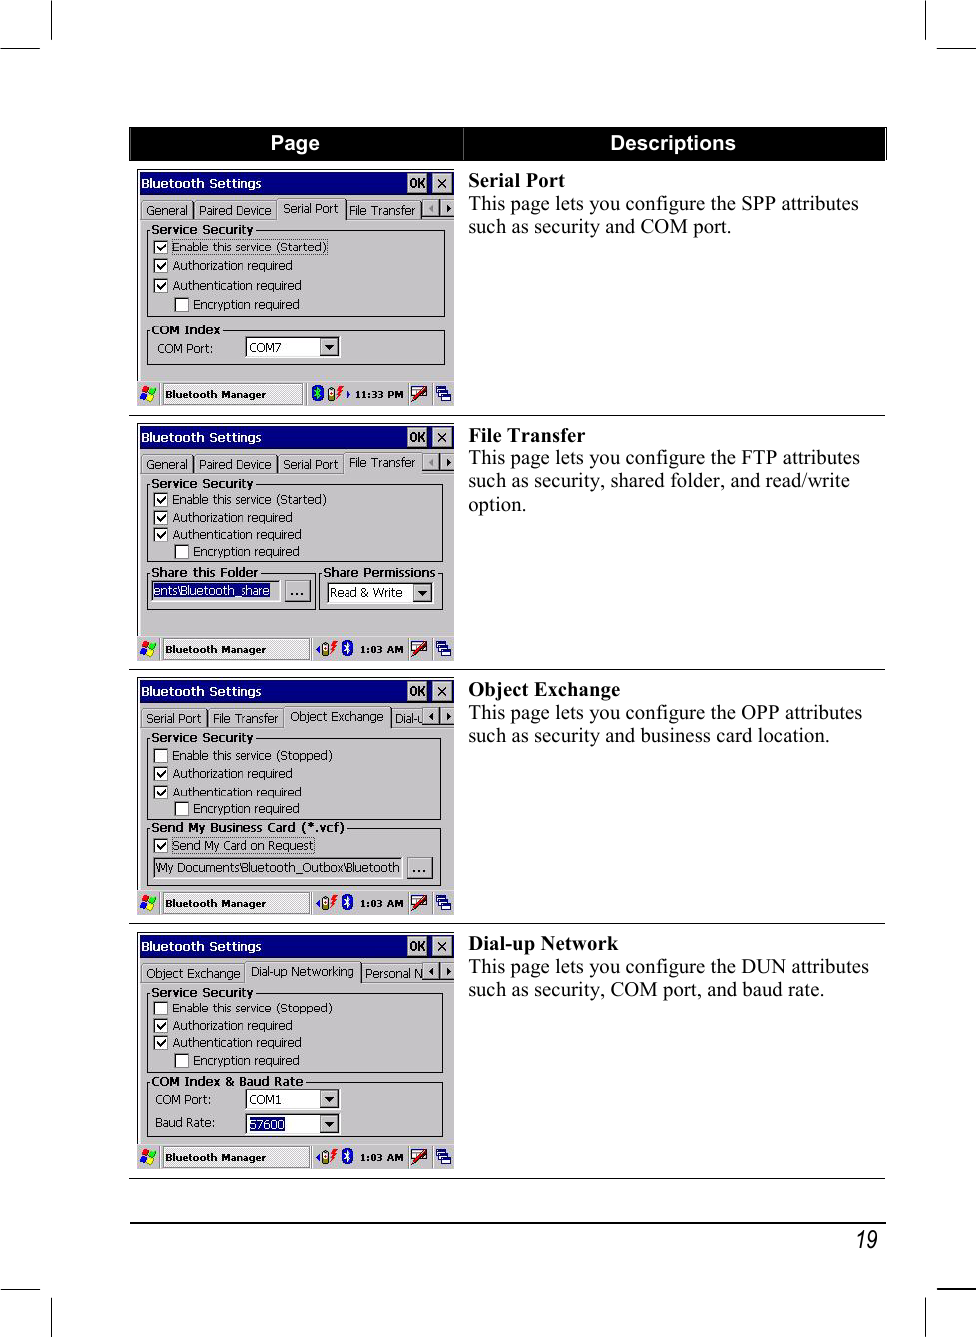   19 Page  Descriptions Serial Port This page lets you configure the SPP attributes such as security and COM port. File Transfer This page lets you configure the FTP attributes such as security, shared folder, and read/write option. Object Exchange This page lets you configure the OPP attributes such as security and business card location. Dial-up Network This page lets you configure the DUN attributes such as security, COM port, and baud rate. 